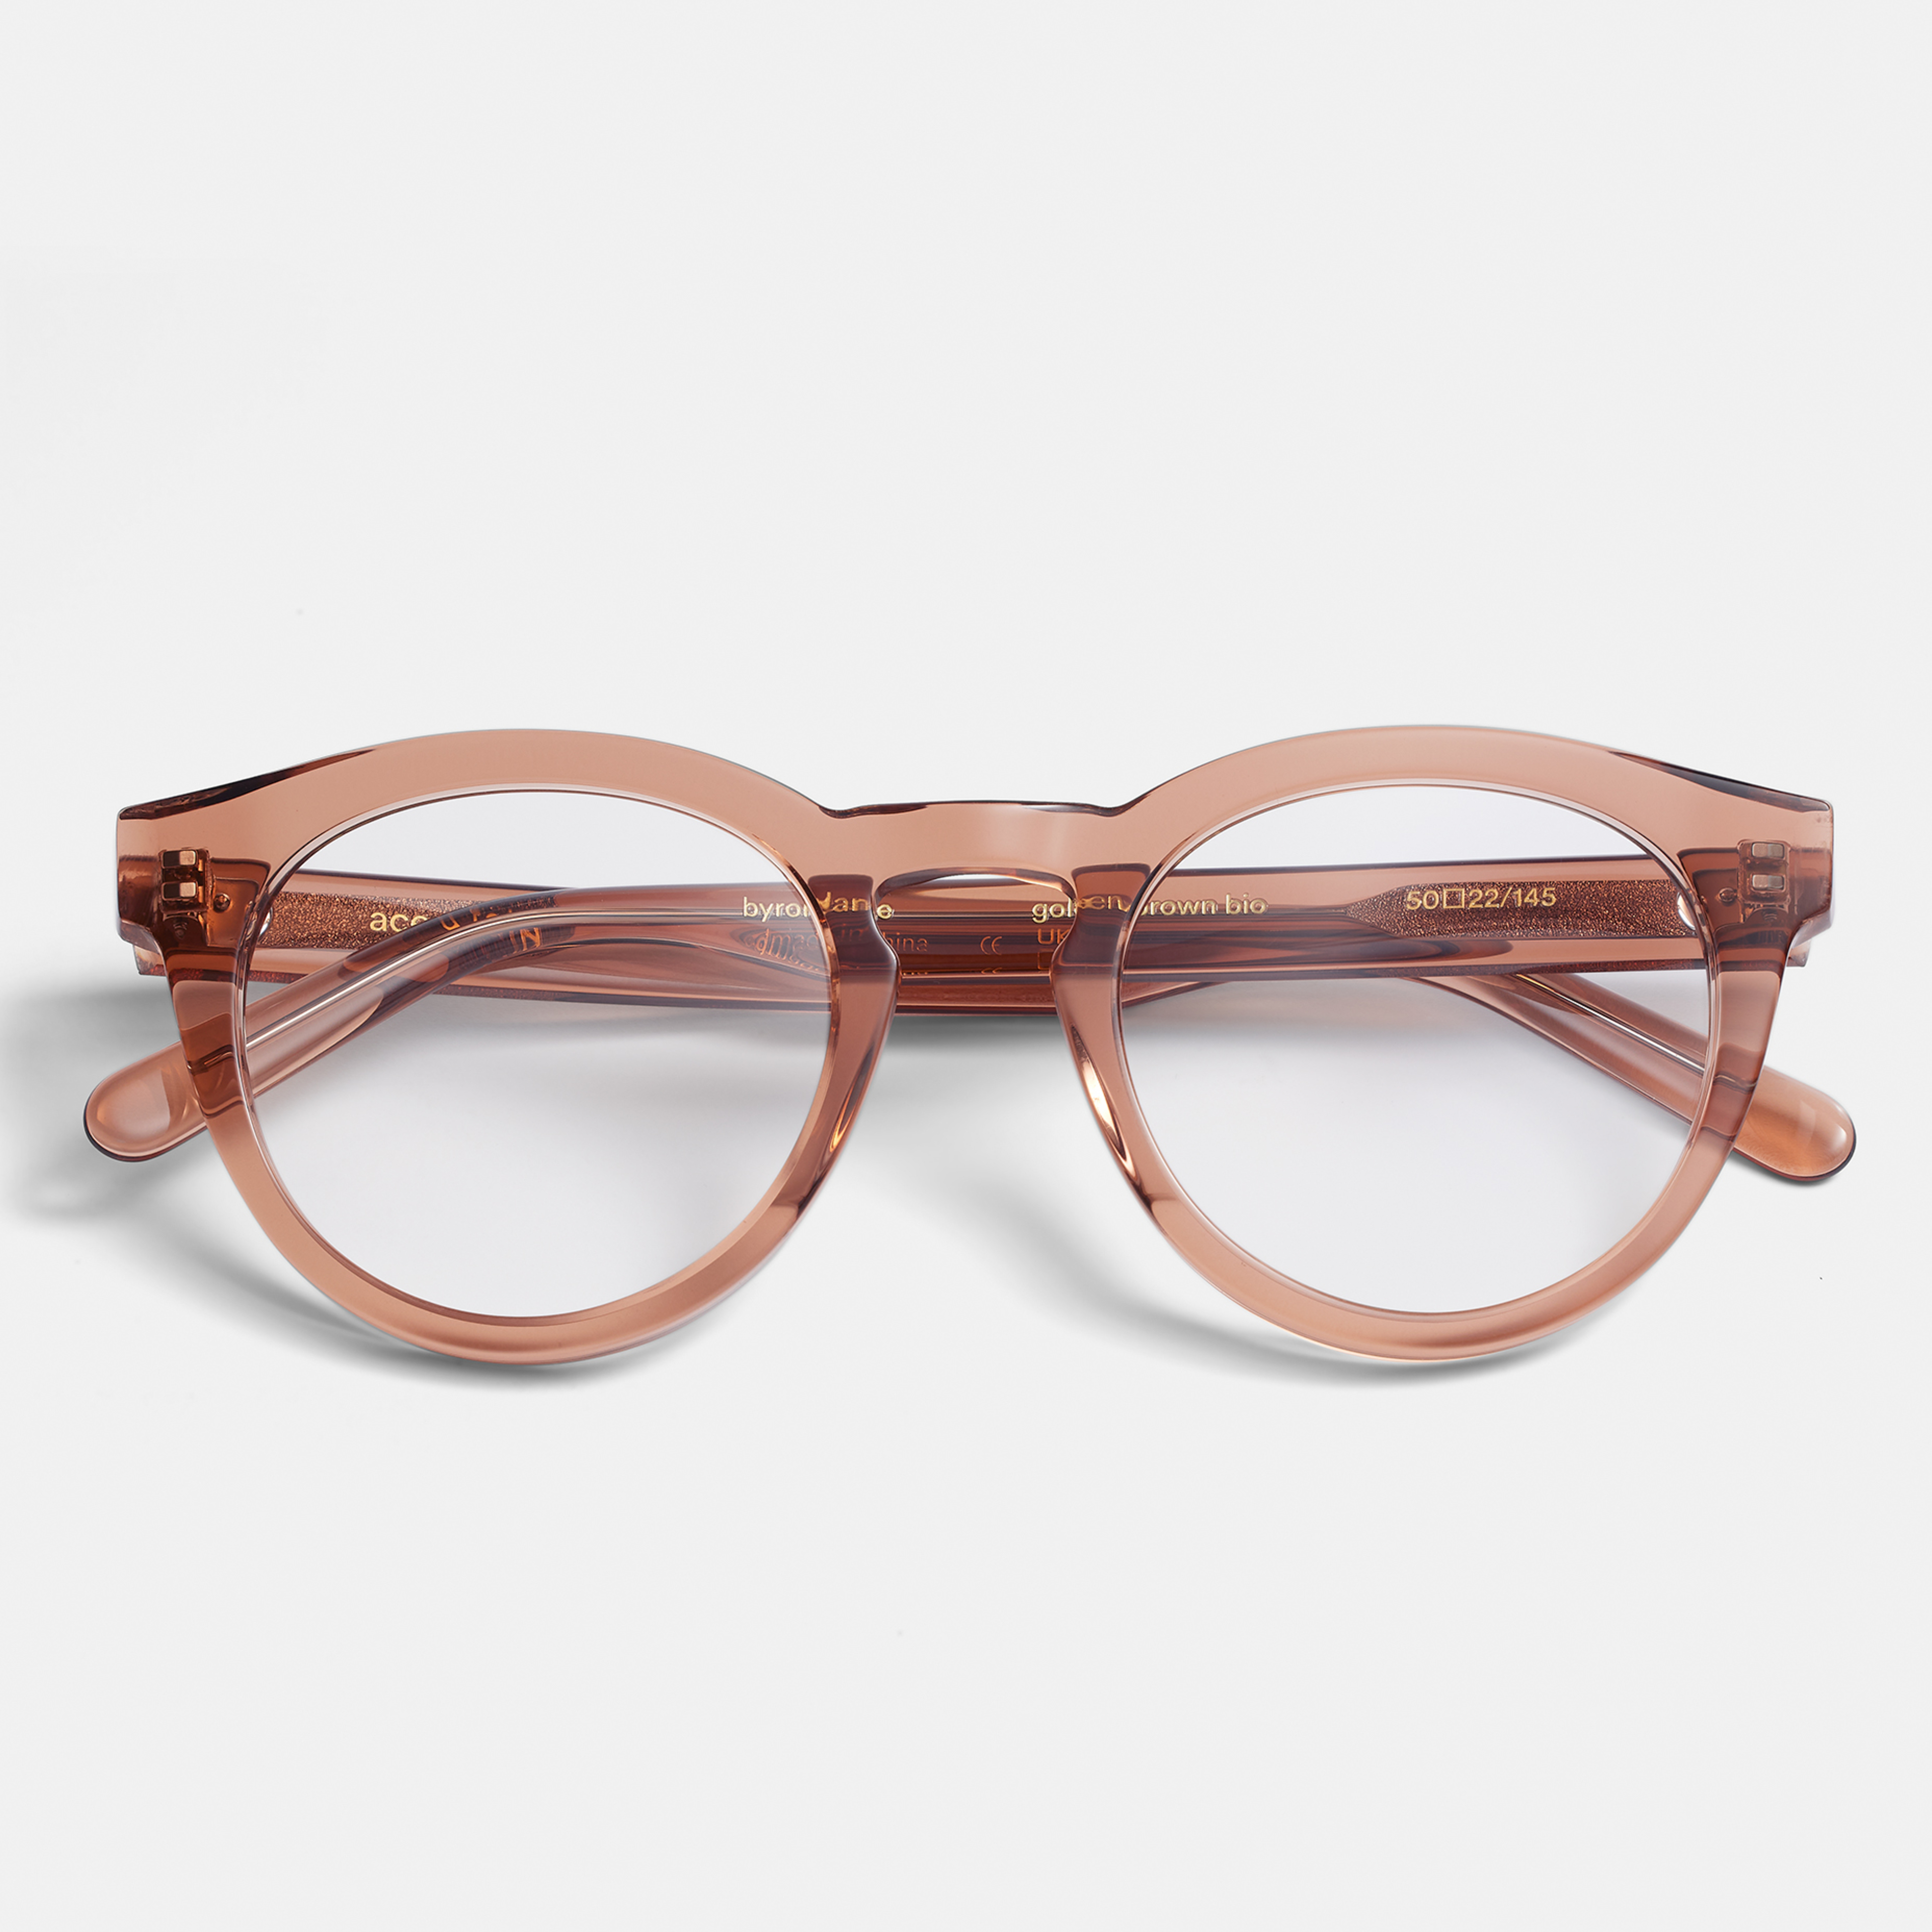 Ace & Tate Glasses | Round Acetate in Brown, Yellow